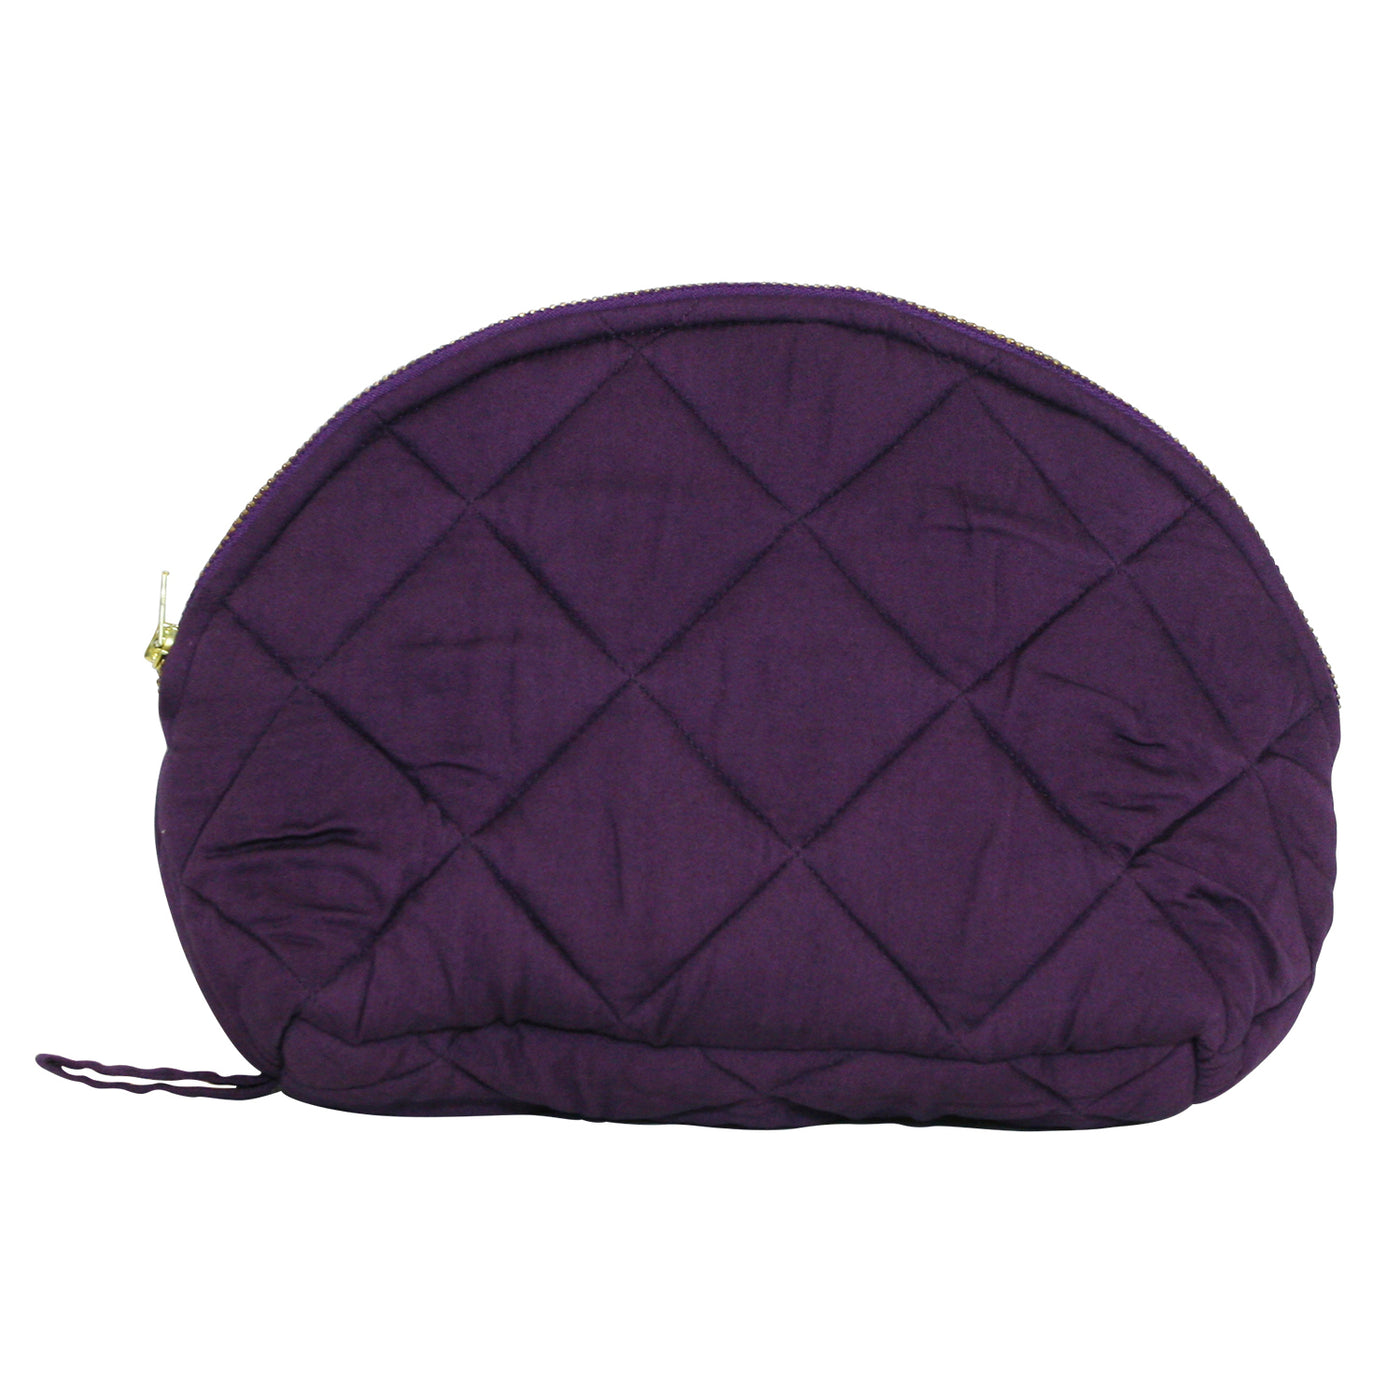 Isabel toilet bag is made in quilted lyocell fabric. Sustainable accessories